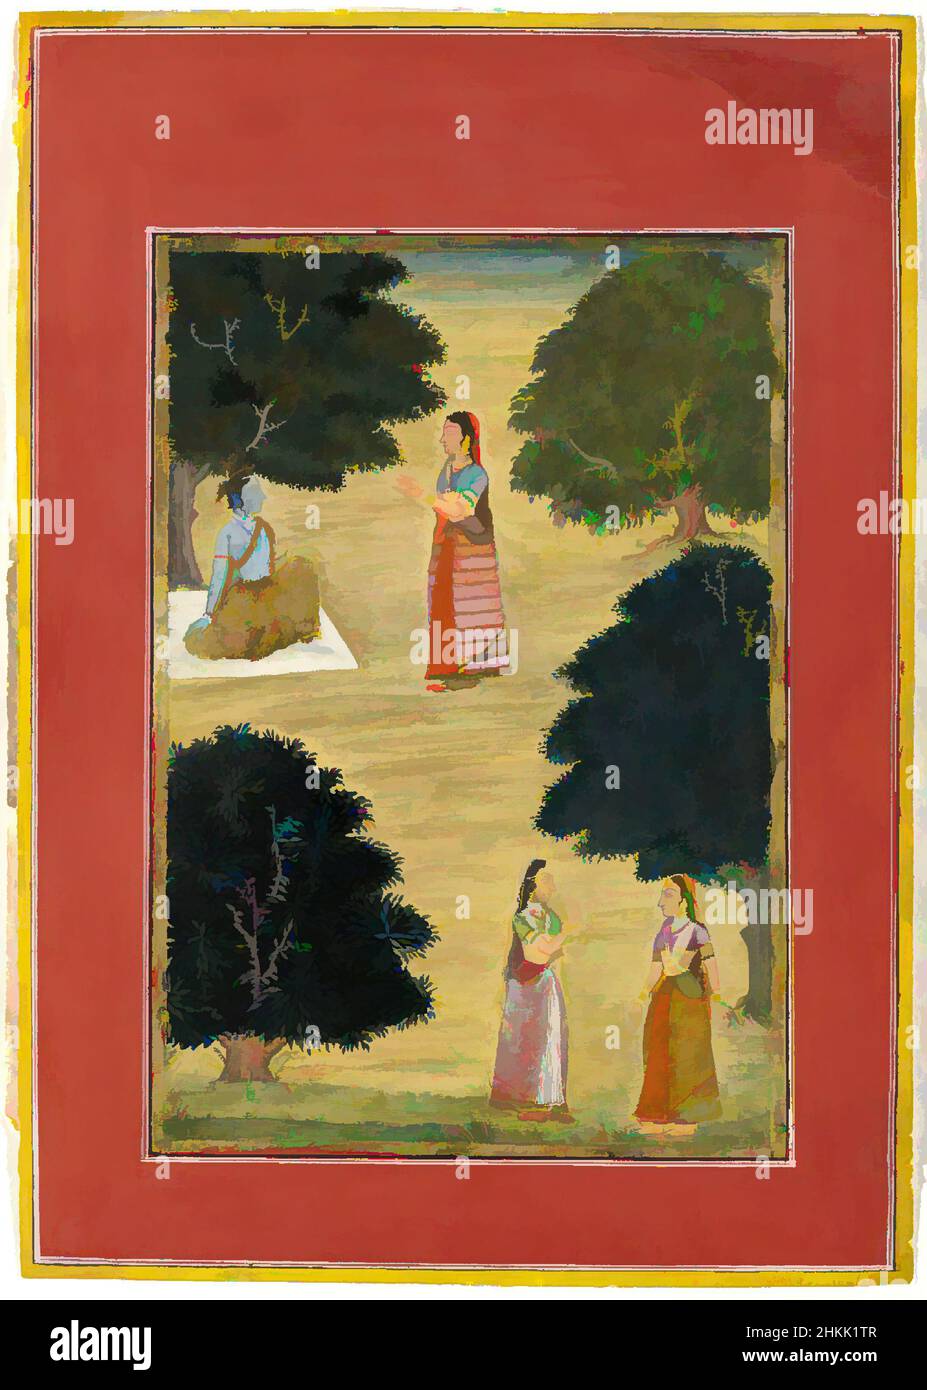 Art inspired by Krishna and Radha, Ruknudin, Opaque watercolor on paper, Bikaner, Rajasthan, India, 1684, Image: 10 5/8 x 7 5/8 in., 27 x 19.3 cm, 1690, figures, gold, India, Indian, Northern India, opaque watercolor, painting, paper, radha, Satasai, trees, watercolor, Classic works modernized by Artotop with a splash of modernity. Shapes, color and value, eye-catching visual impact on art. Emotions through freedom of artworks in a contemporary way. A timeless message pursuing a wildly creative new direction. Artists turning to the digital medium and creating the Artotop NFT Stock Photo